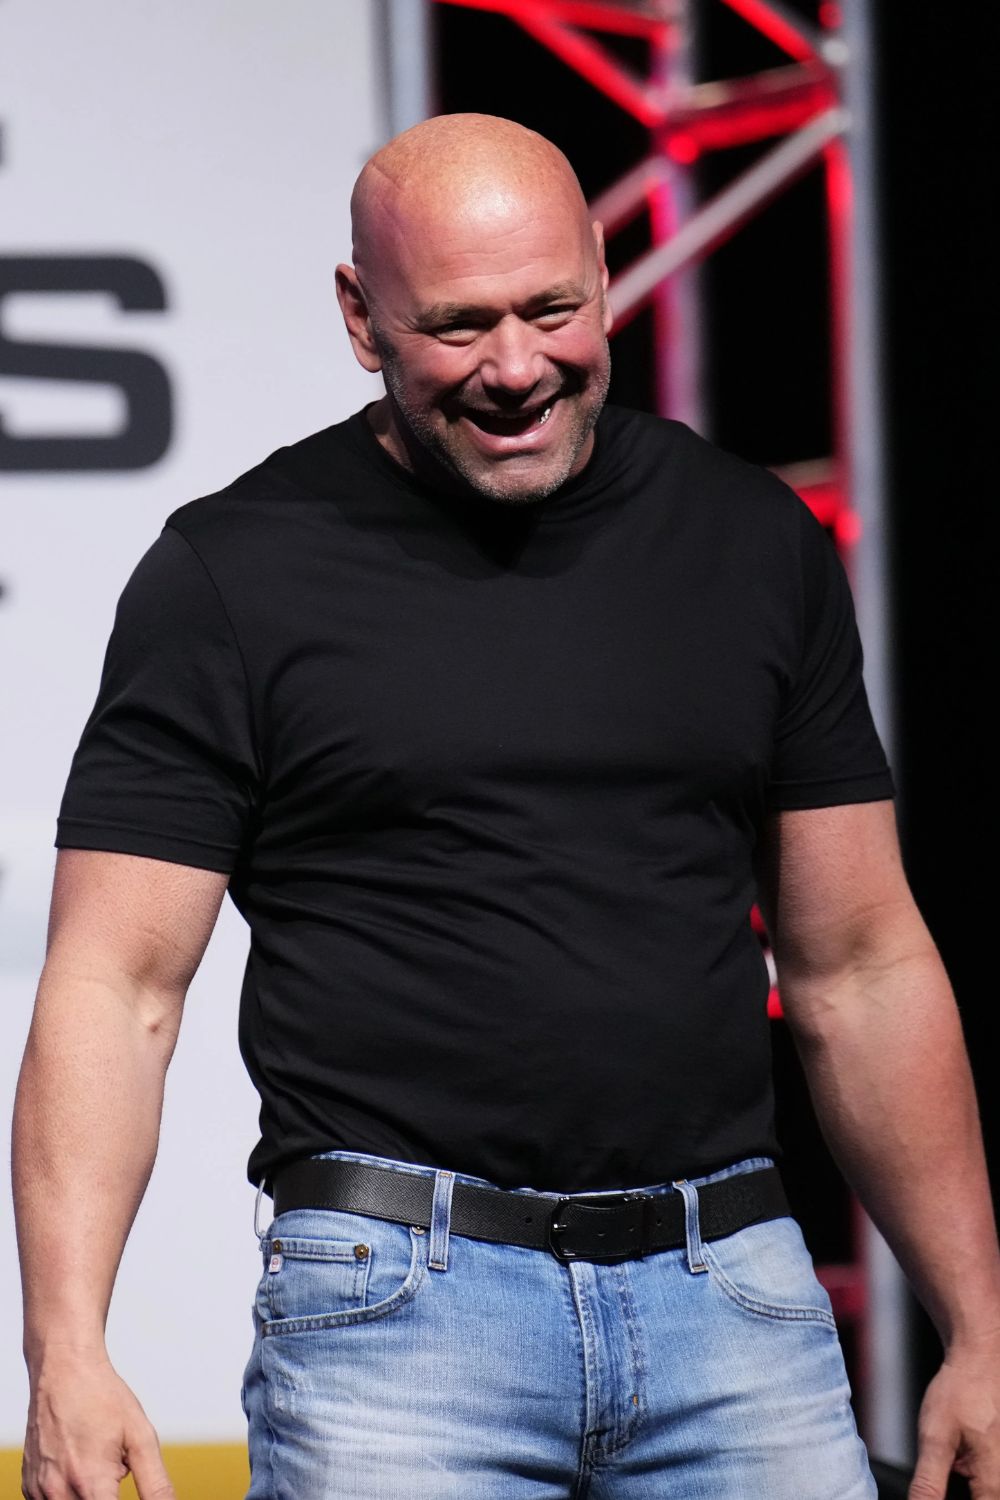 Dana White Has Been Involved In UFC For Over 20 Years